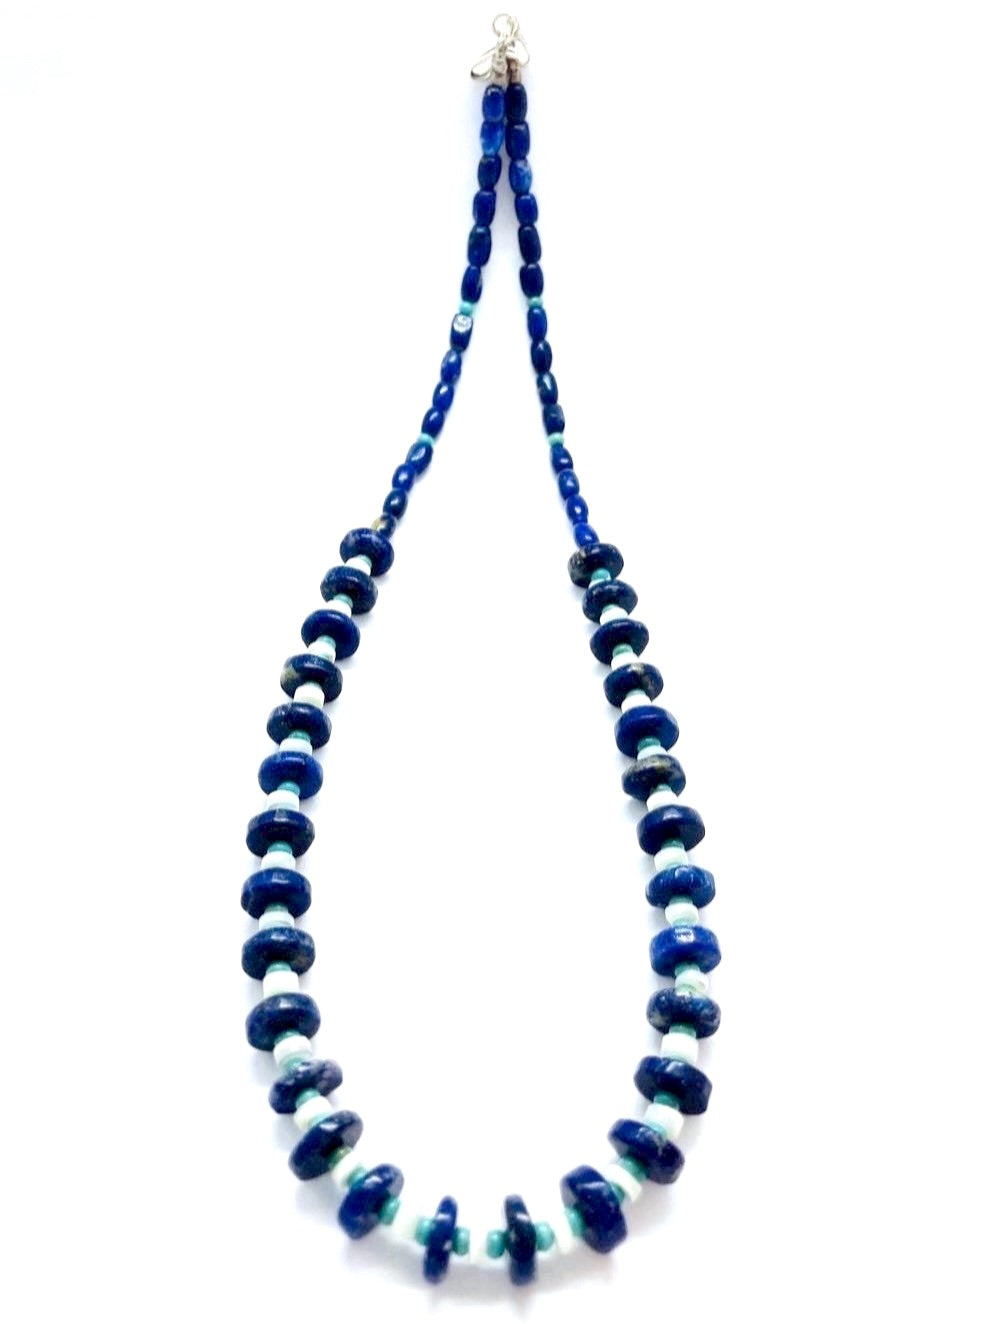 Turquoise & Lapis necklace 17inch